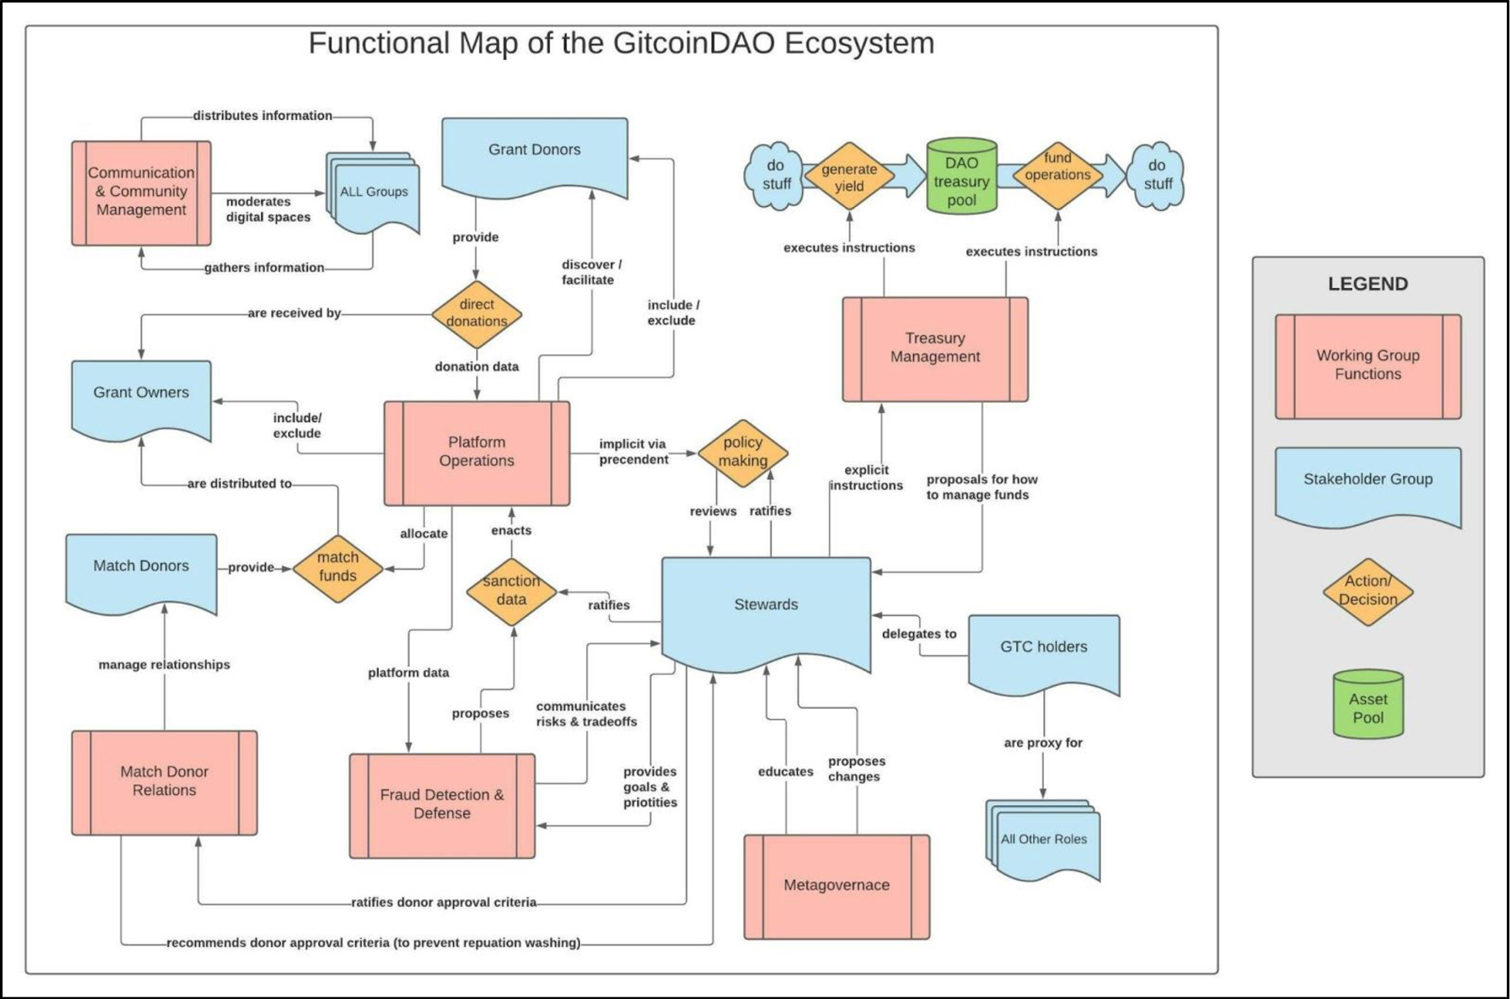 Functional Mapping of GitcoinDAO Ecosystem, showing the interconnections of Working Group Functions, Stakeholder Groups, Actions and Decisions, and Asset Pools